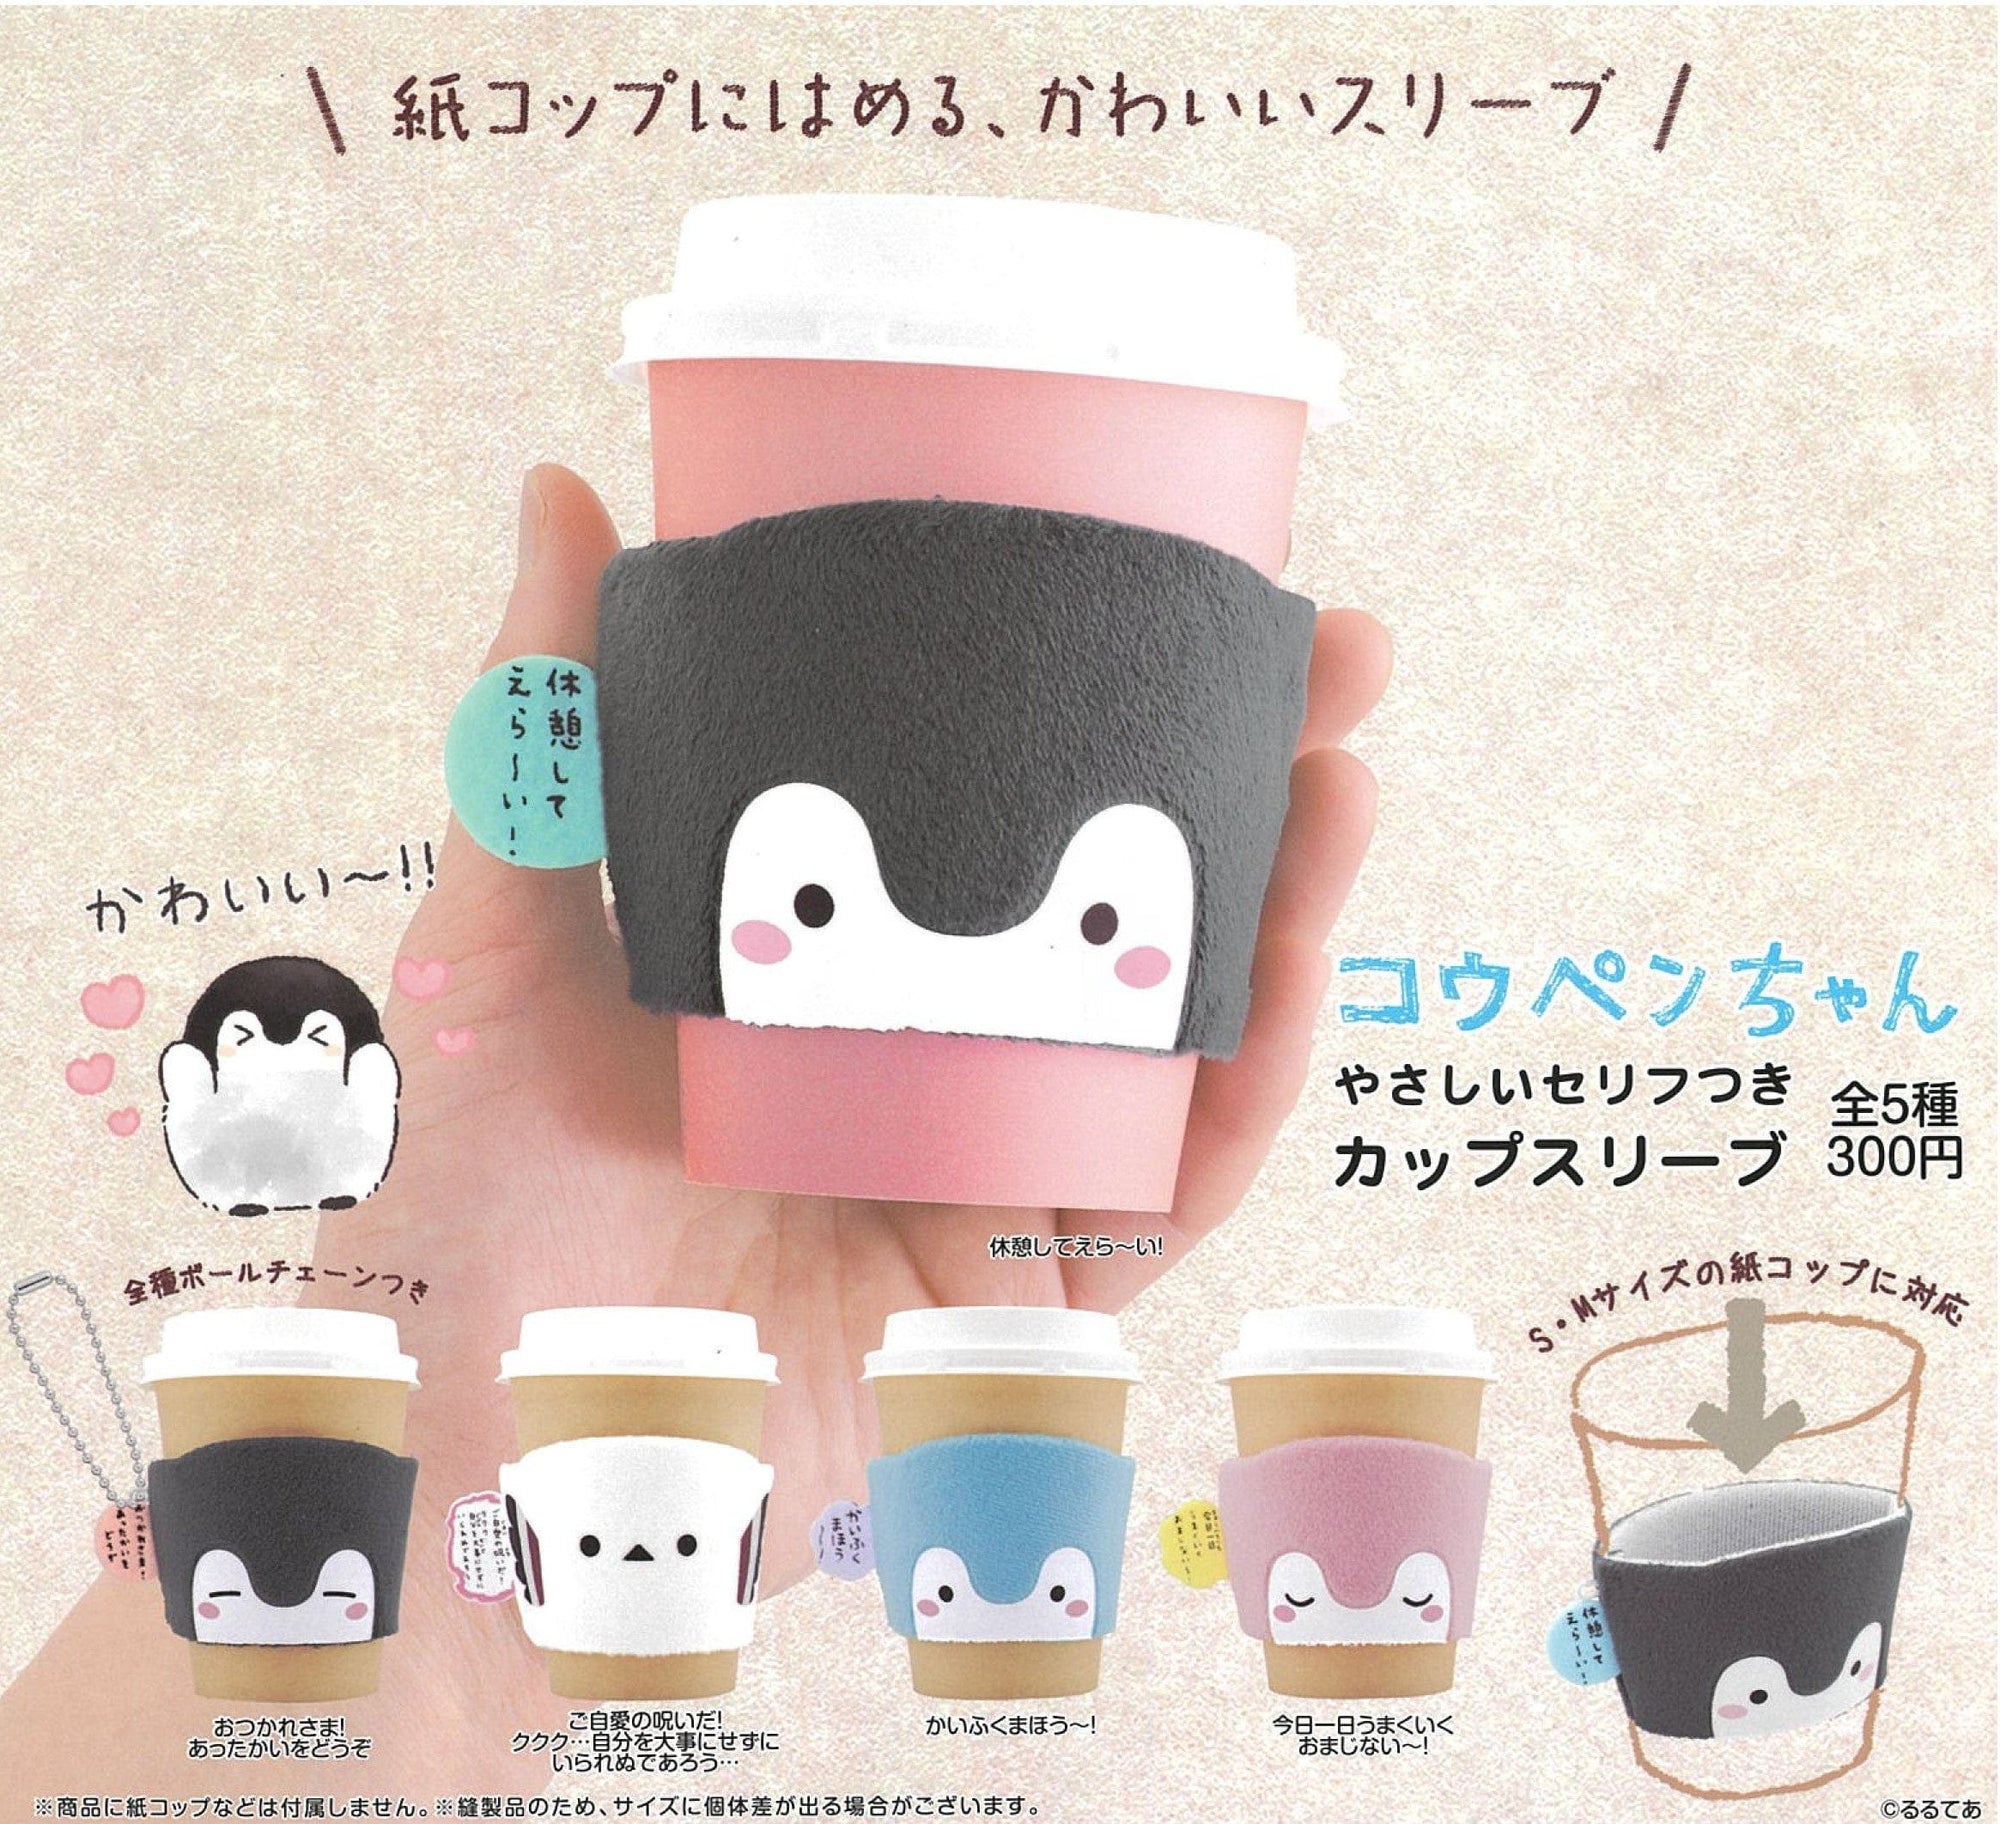 Kitan Club CP0340 - Koupen-chan - Cup Sleeve with Yasashii Words - Complete Set